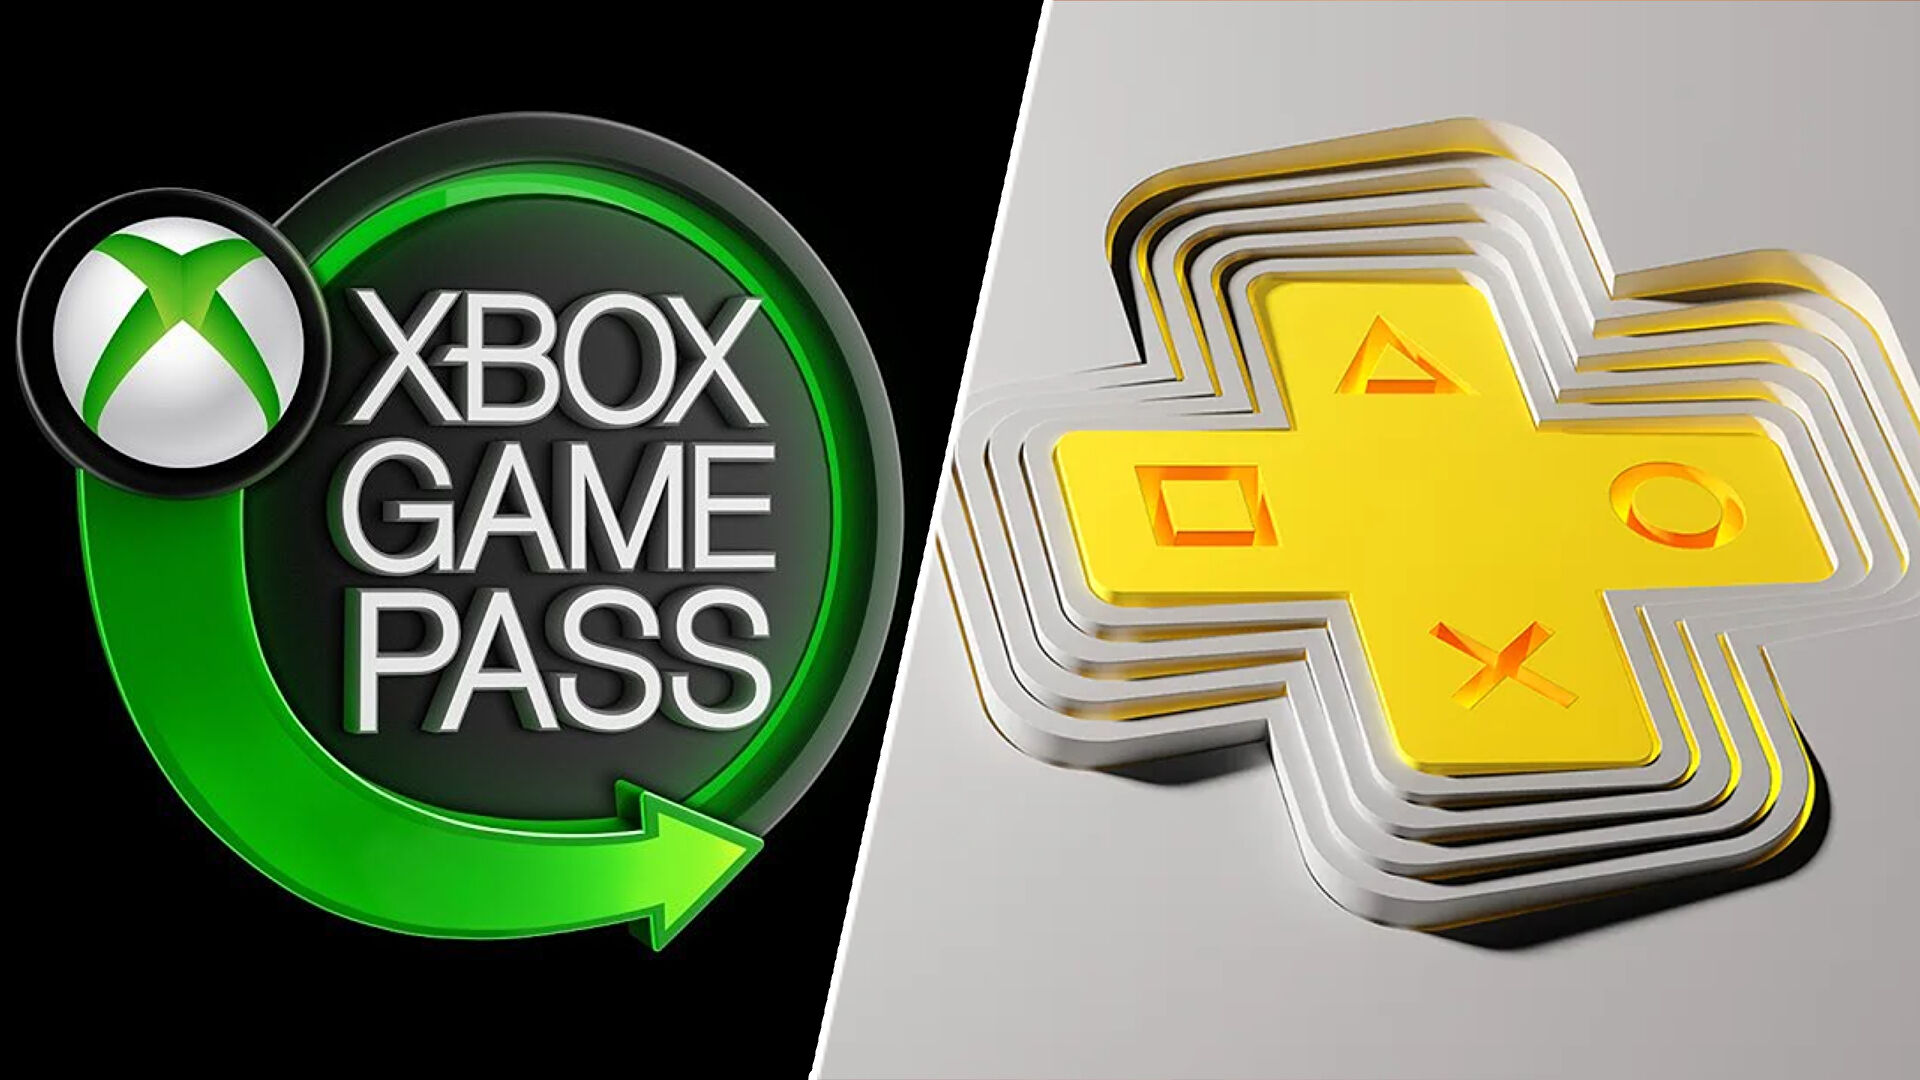 Xbox Game Pass subscribers way ahead of PS Plus tiers, says Sony in latest attempt to make itself look small